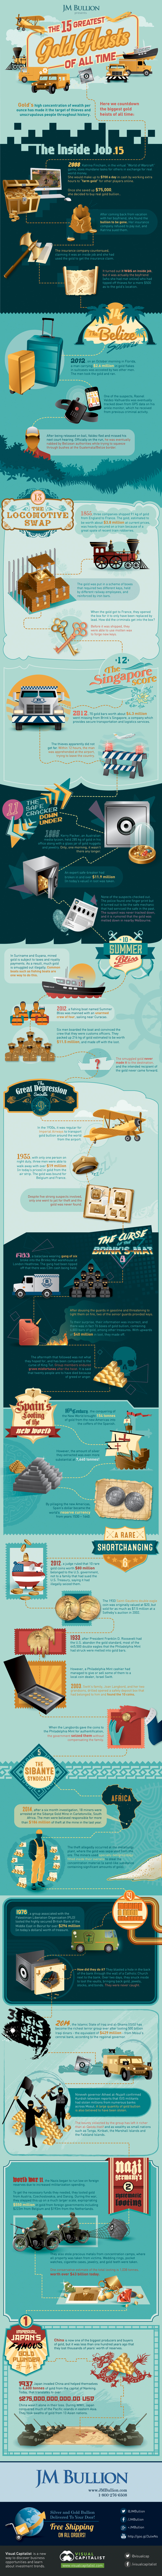 the-15-greatest-gold-heists-infographic